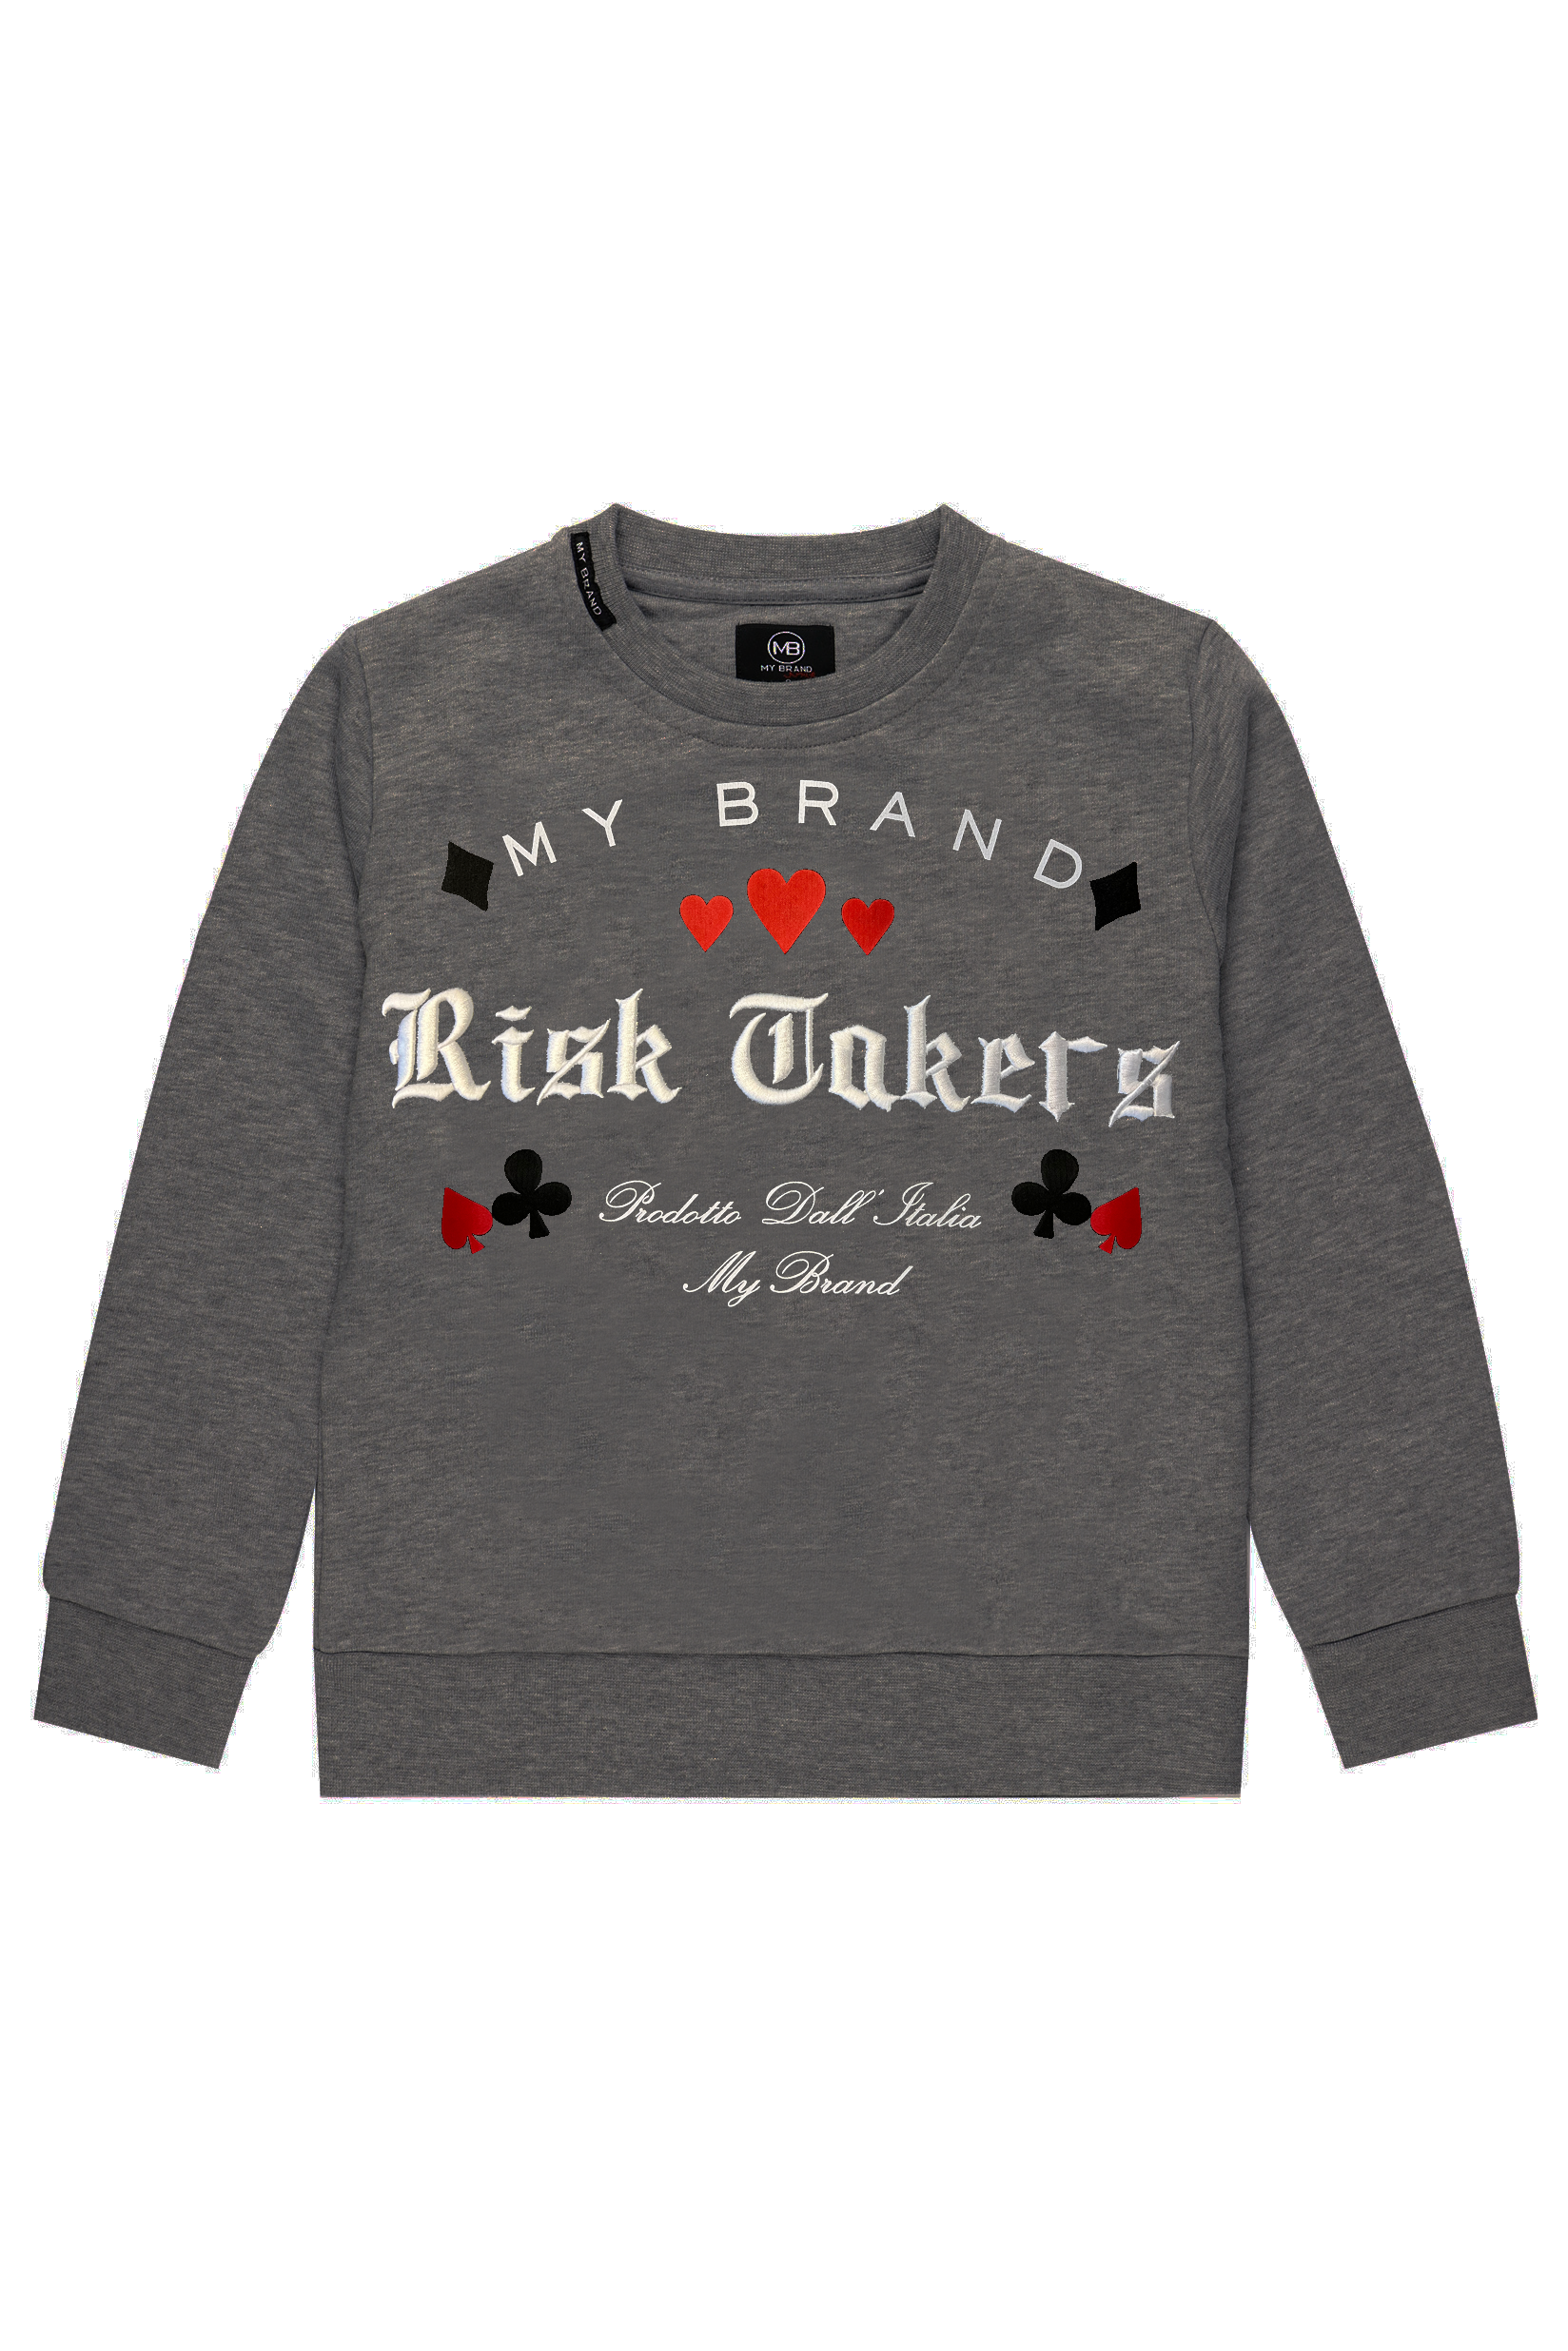 Takers Risk Cards Sweater Grey